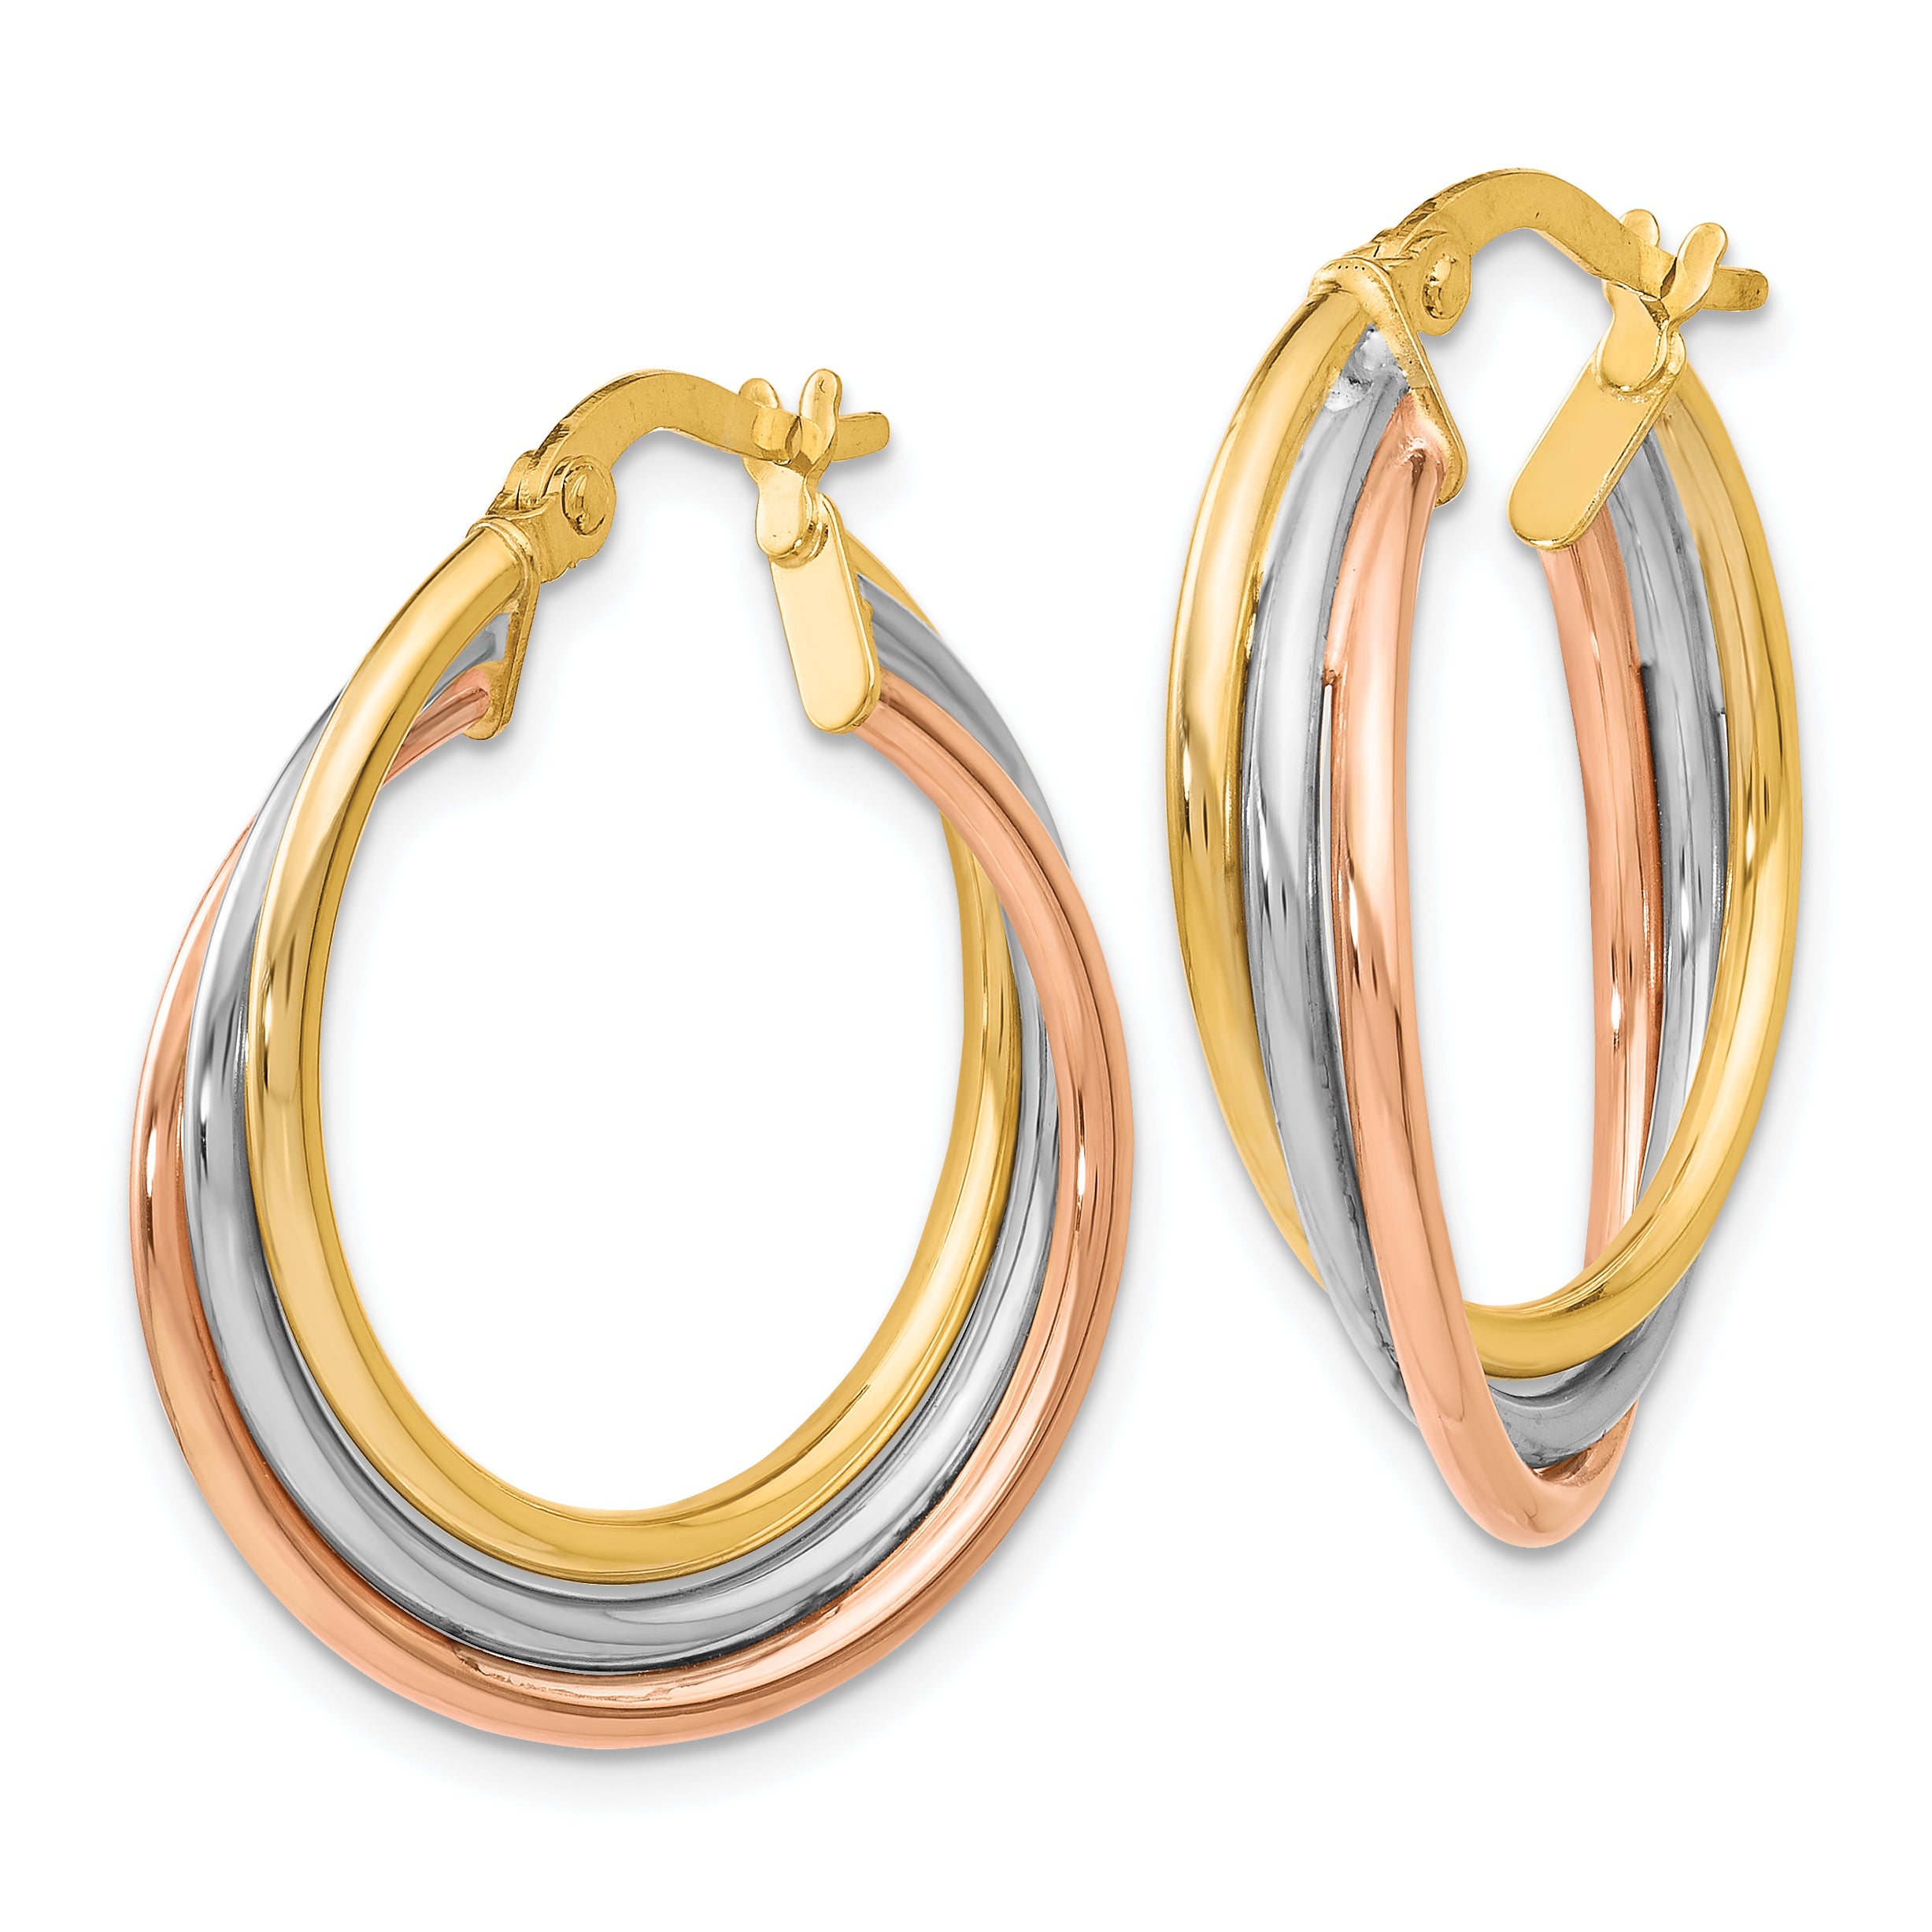 10K Tri-color Polished and Textured Twisted Hoop Earrings